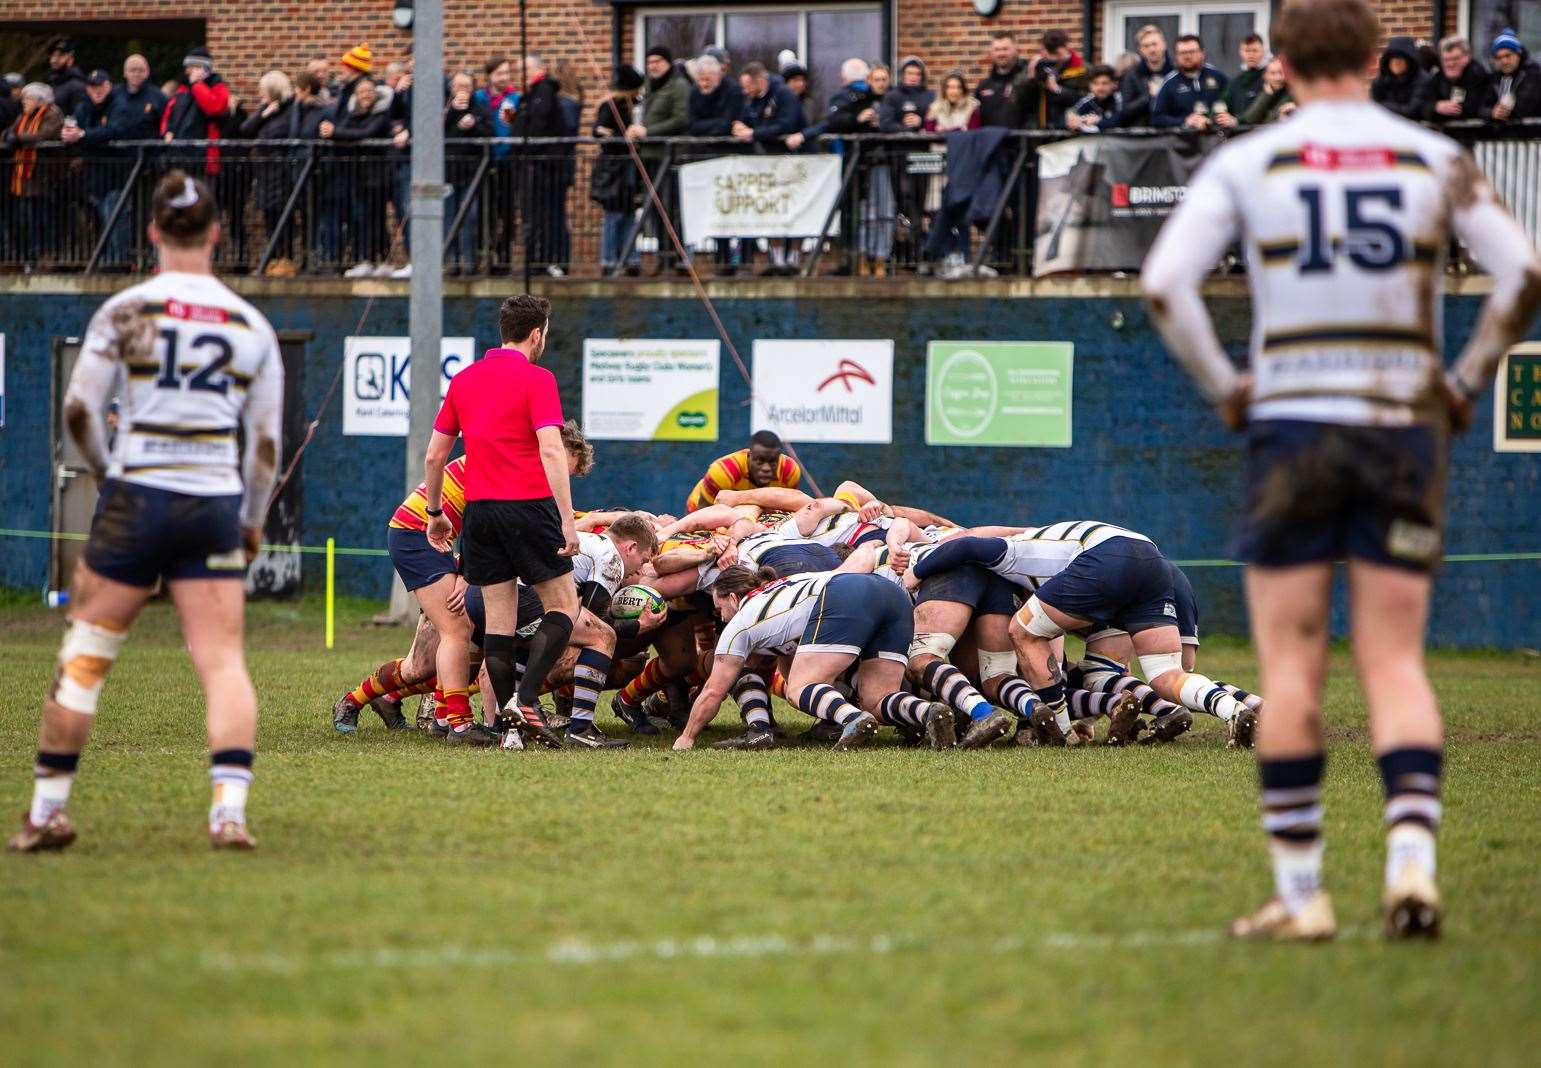 Tunbridge Wells scrum and crowded clubhouse at Medway for their final league game of the season